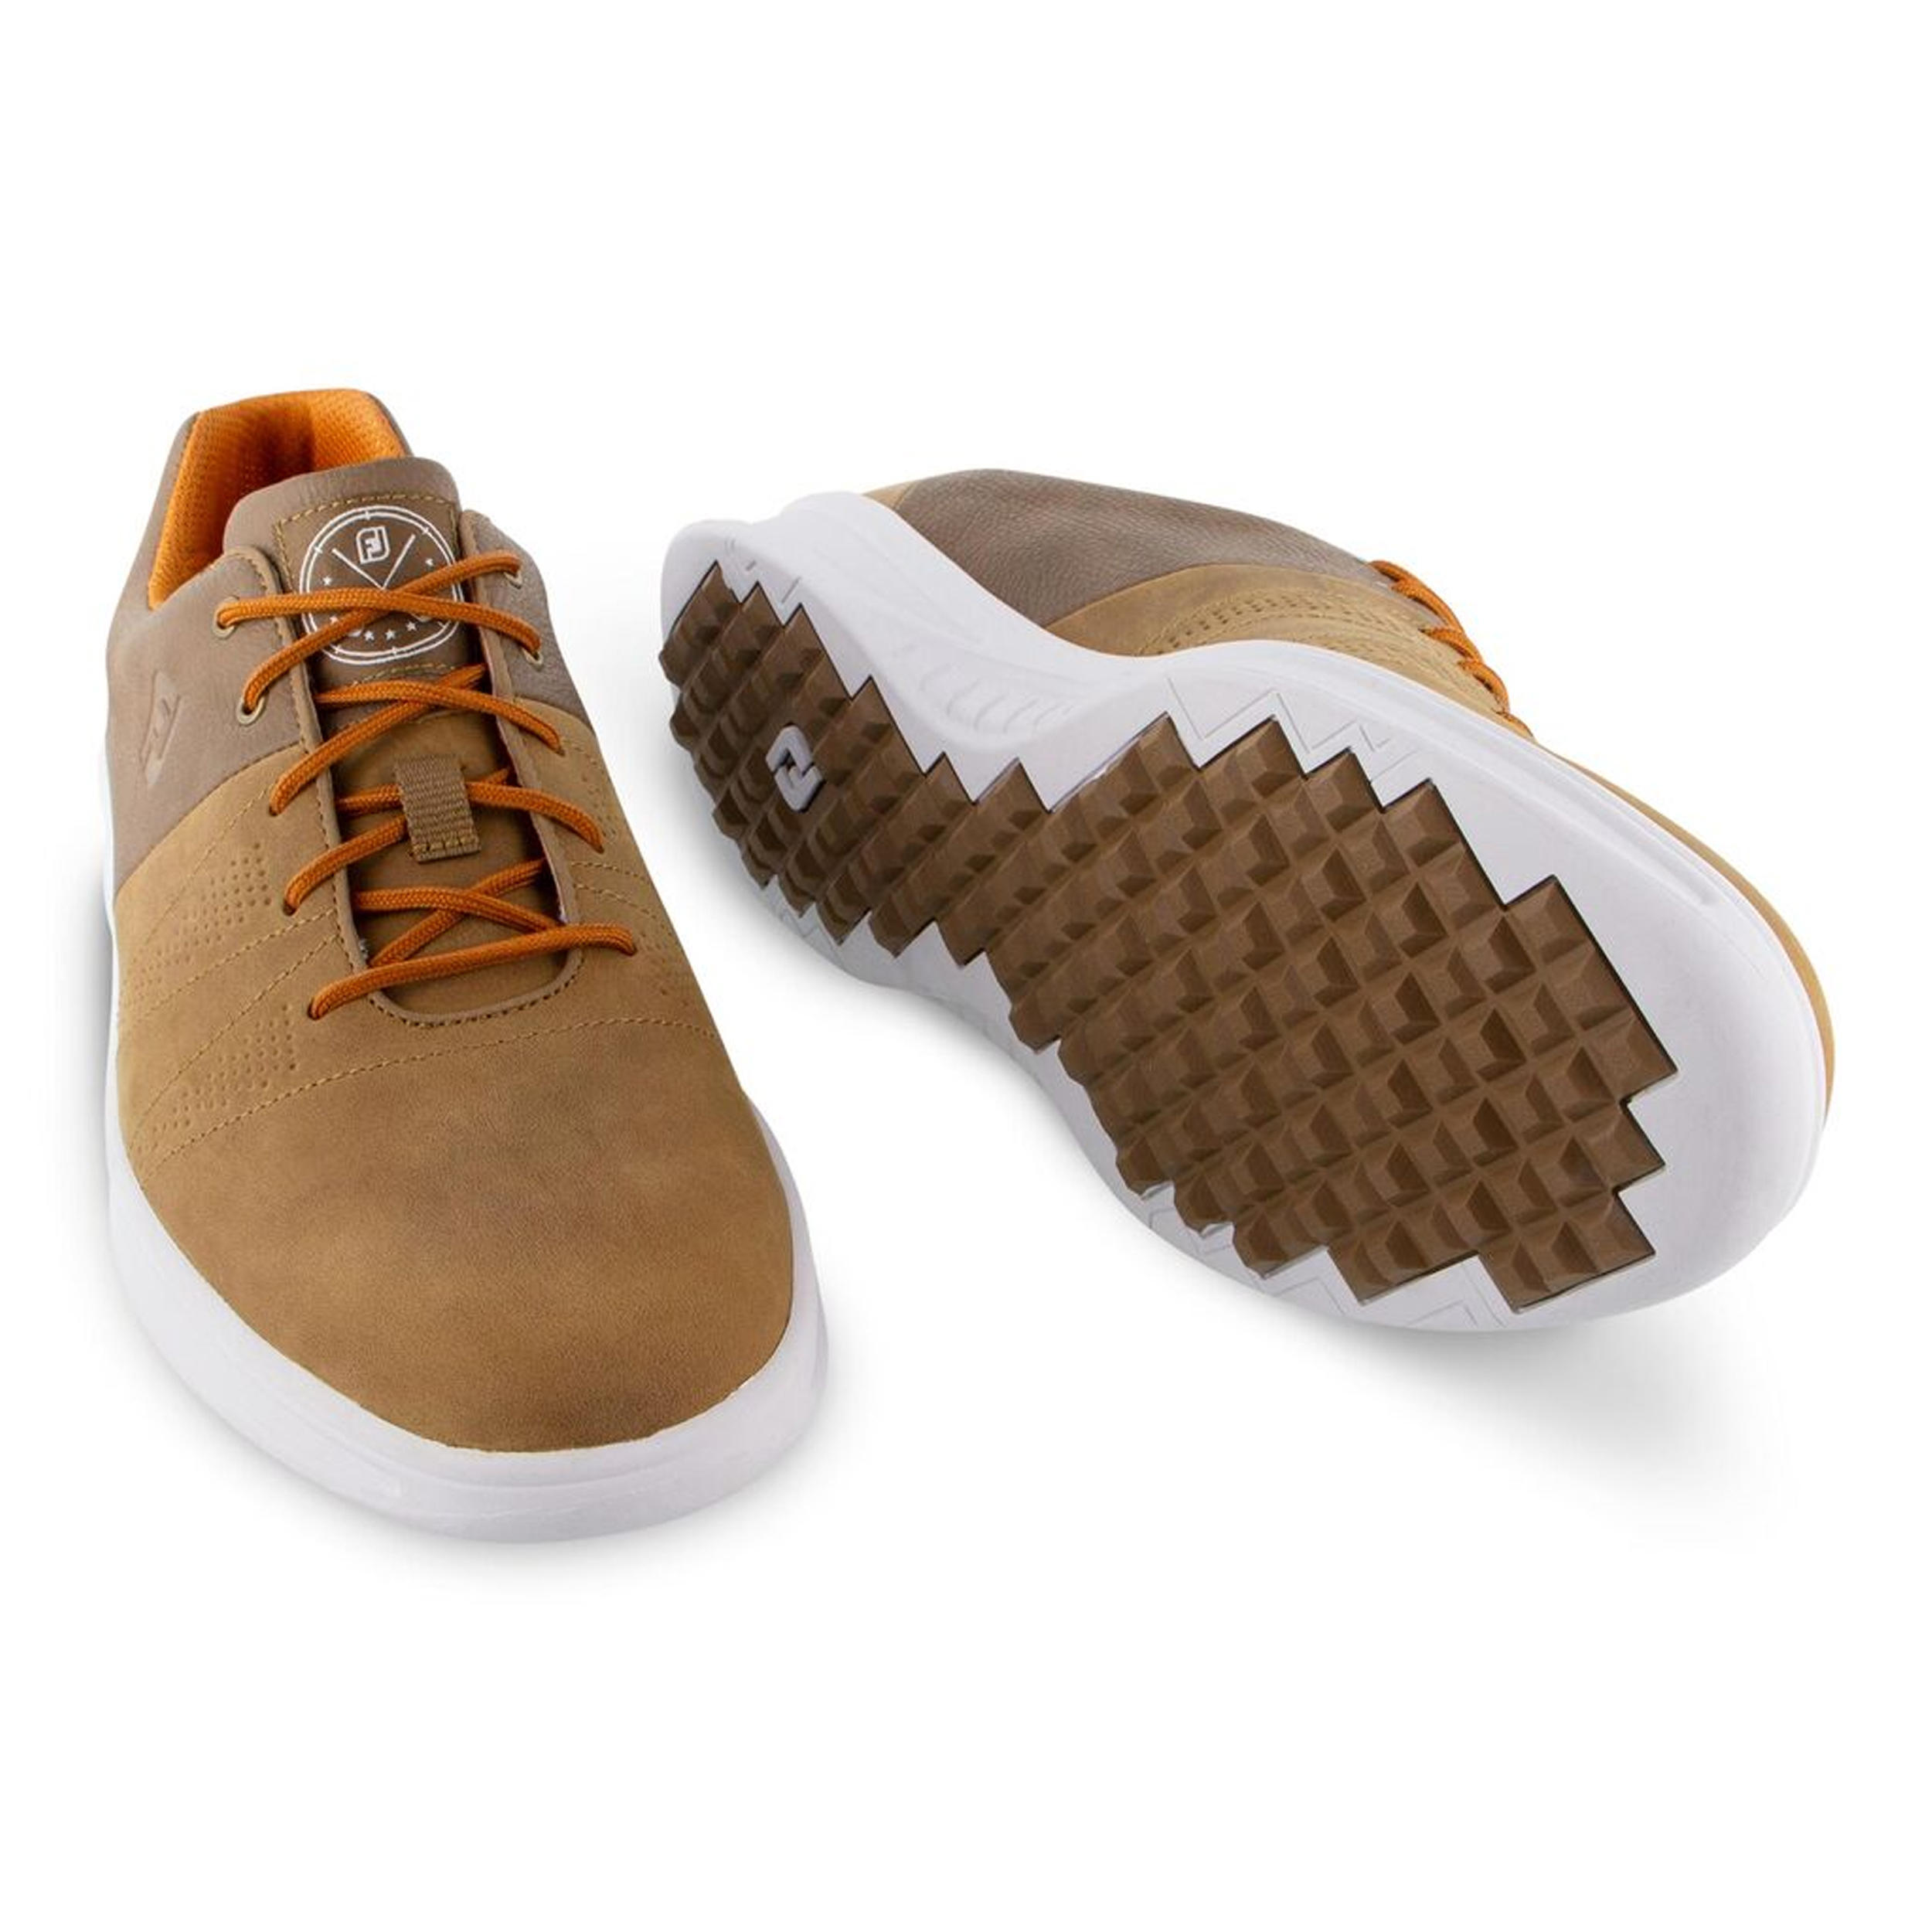 footjoy casual spikeless golf shoes